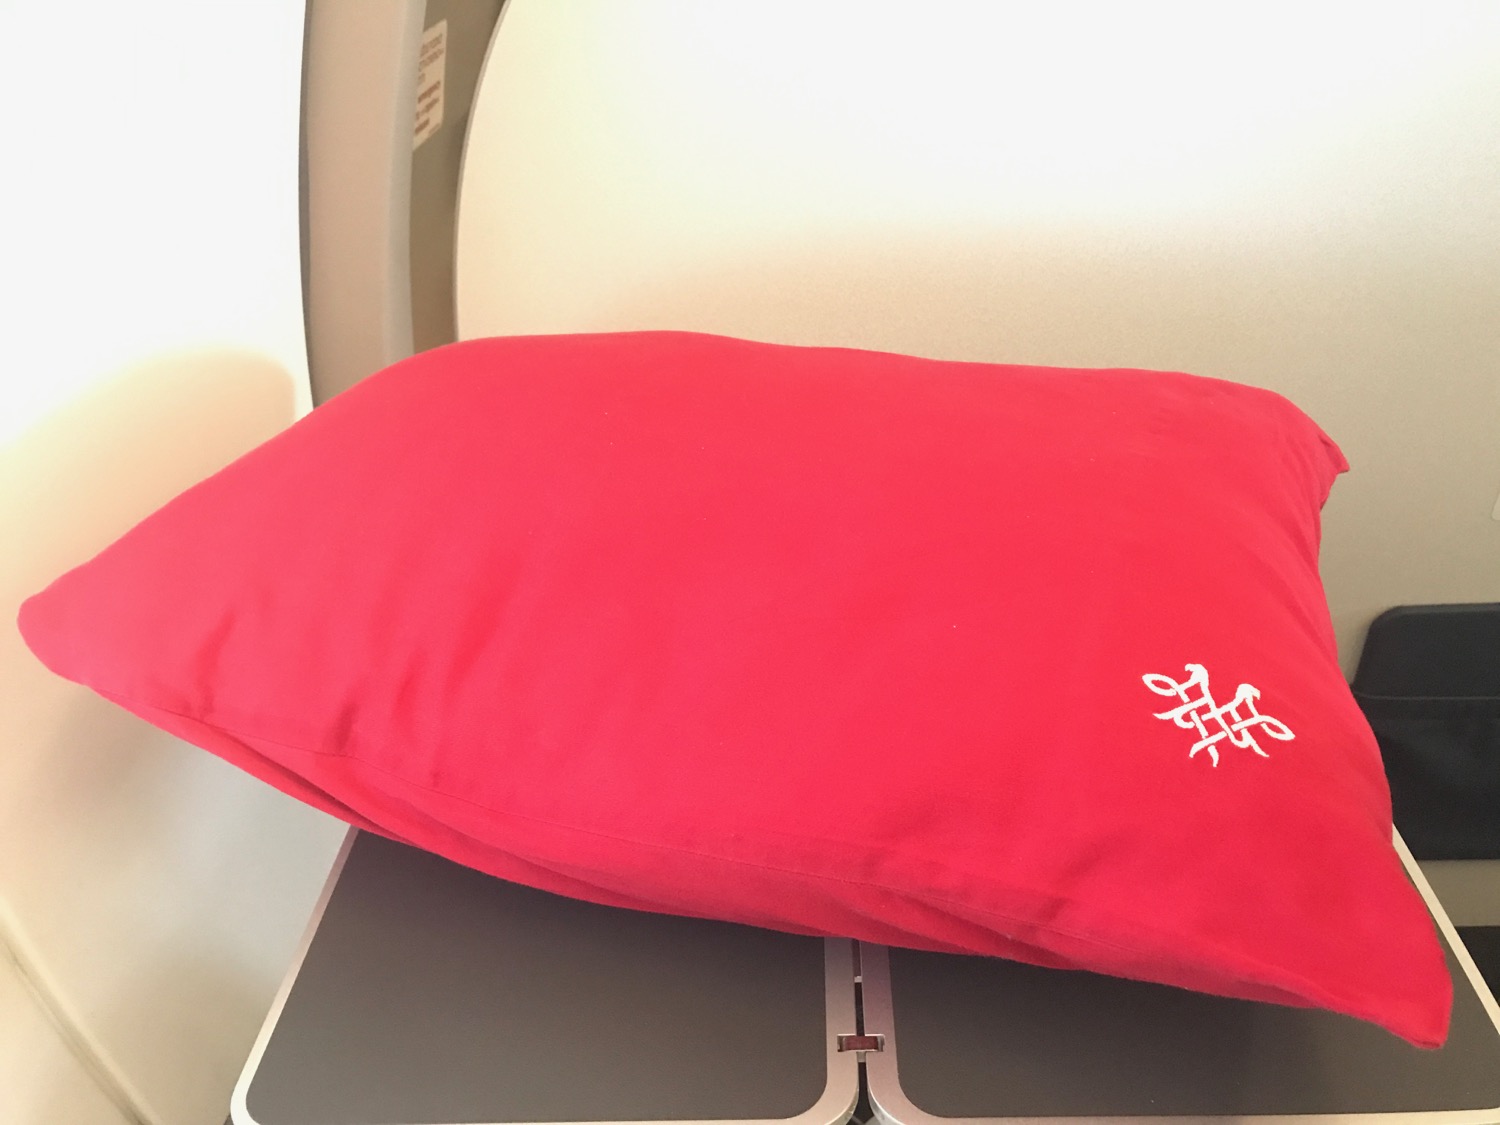 a red pillow on a grey surface